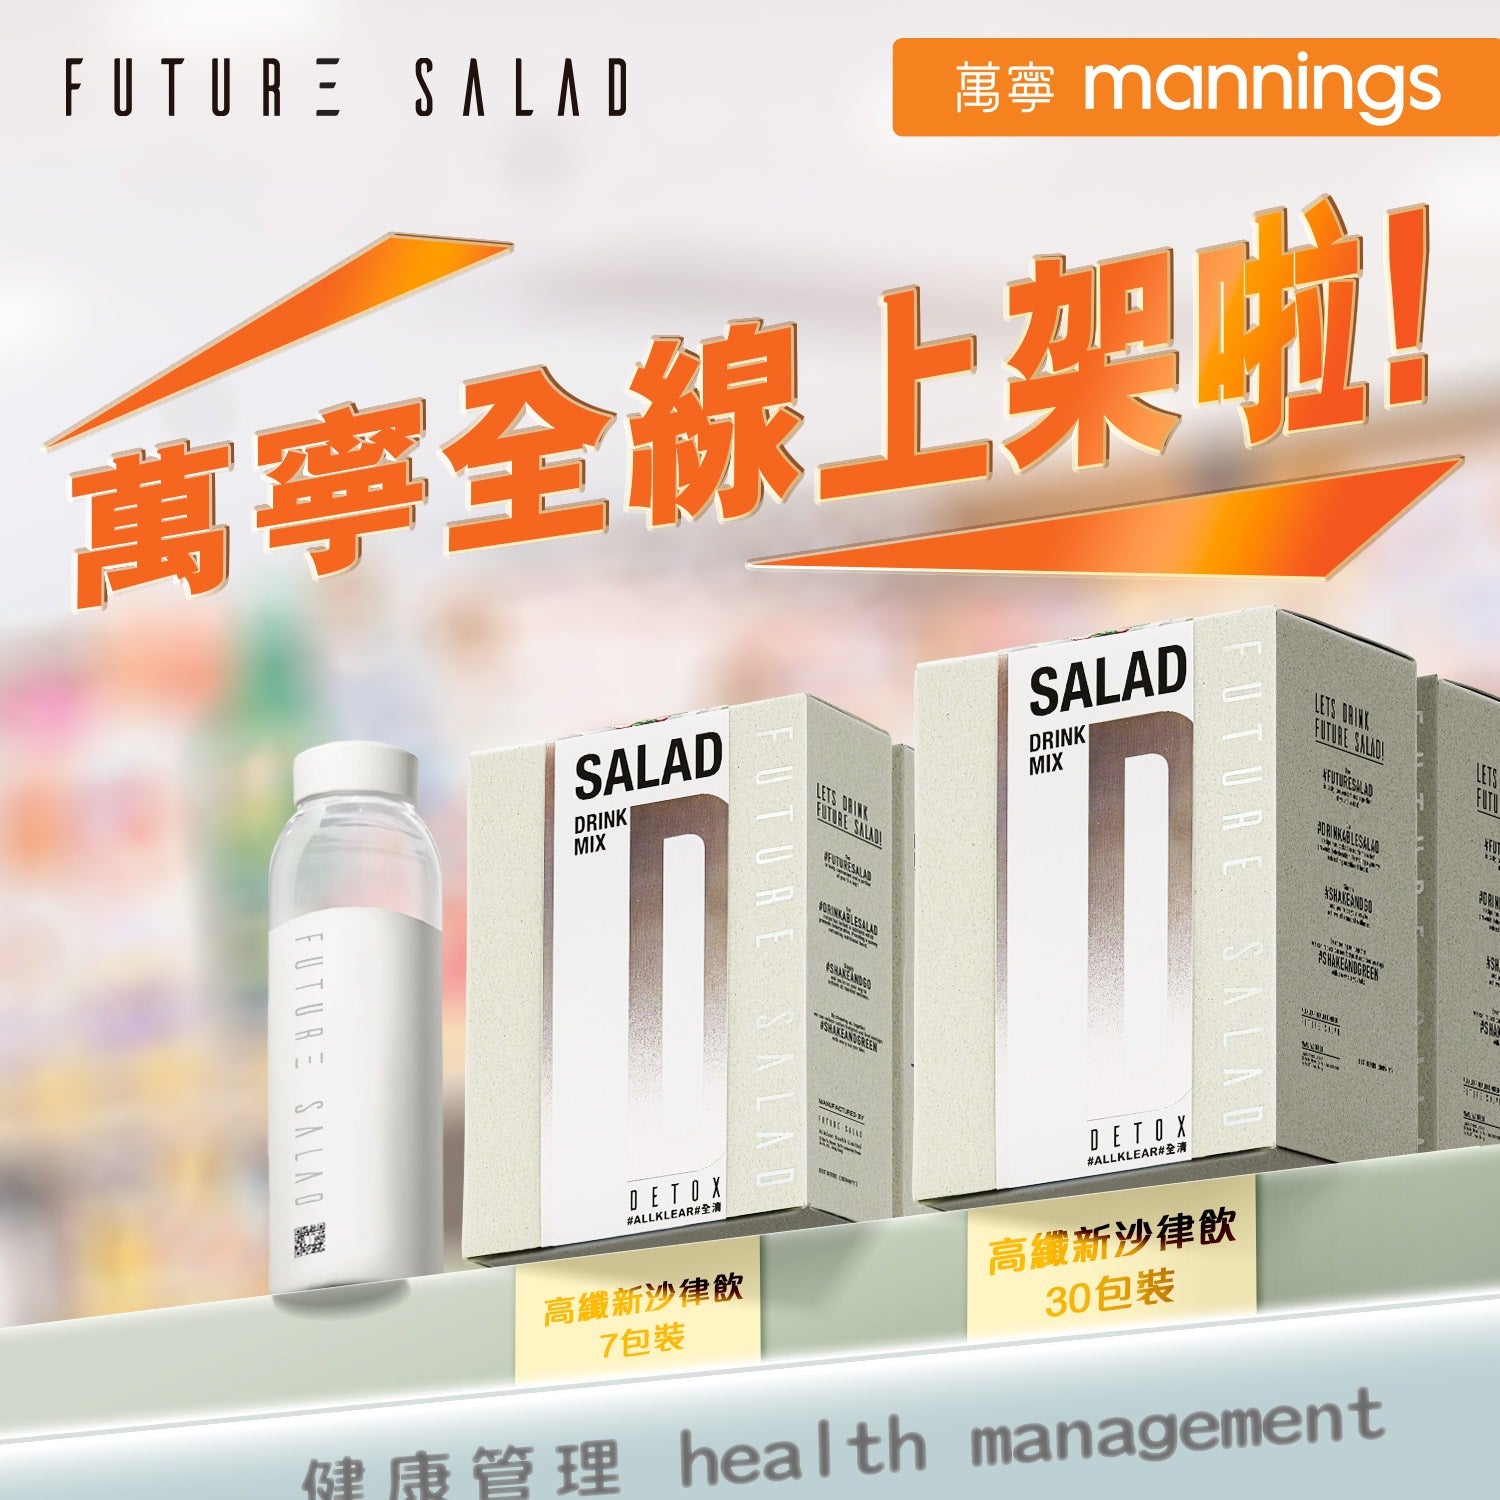 Future Salad 新沙律已於萬寧上架發售！Future Salad has been launched at Mannings!